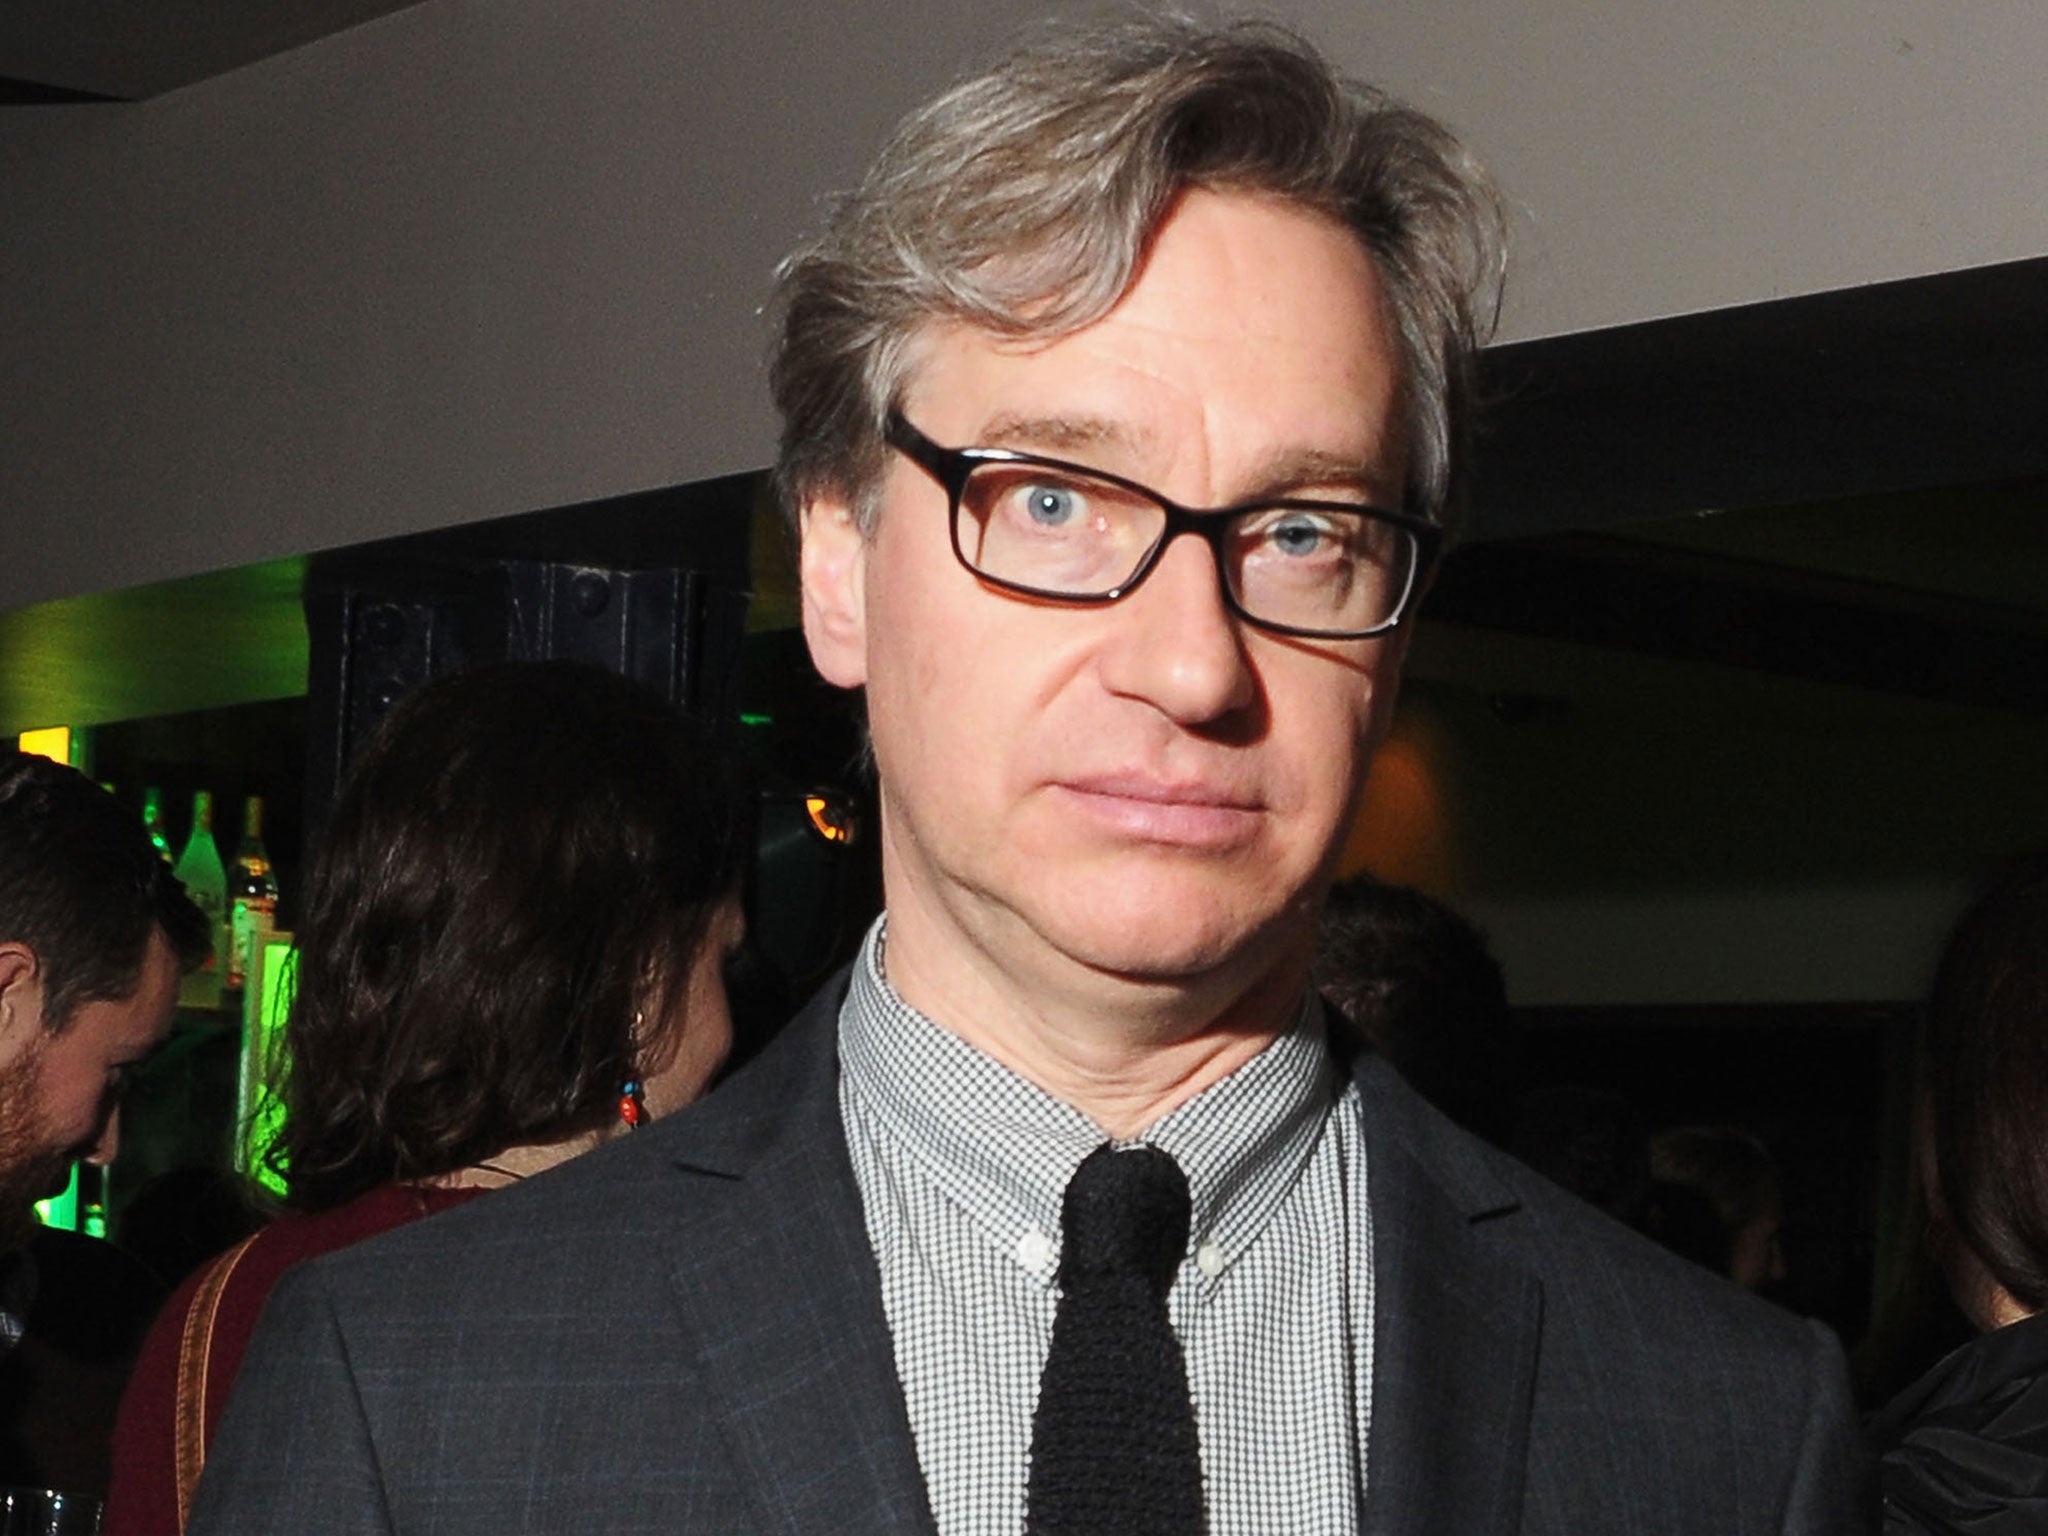 Director Paul Feig wants to showcase more female talent in movies